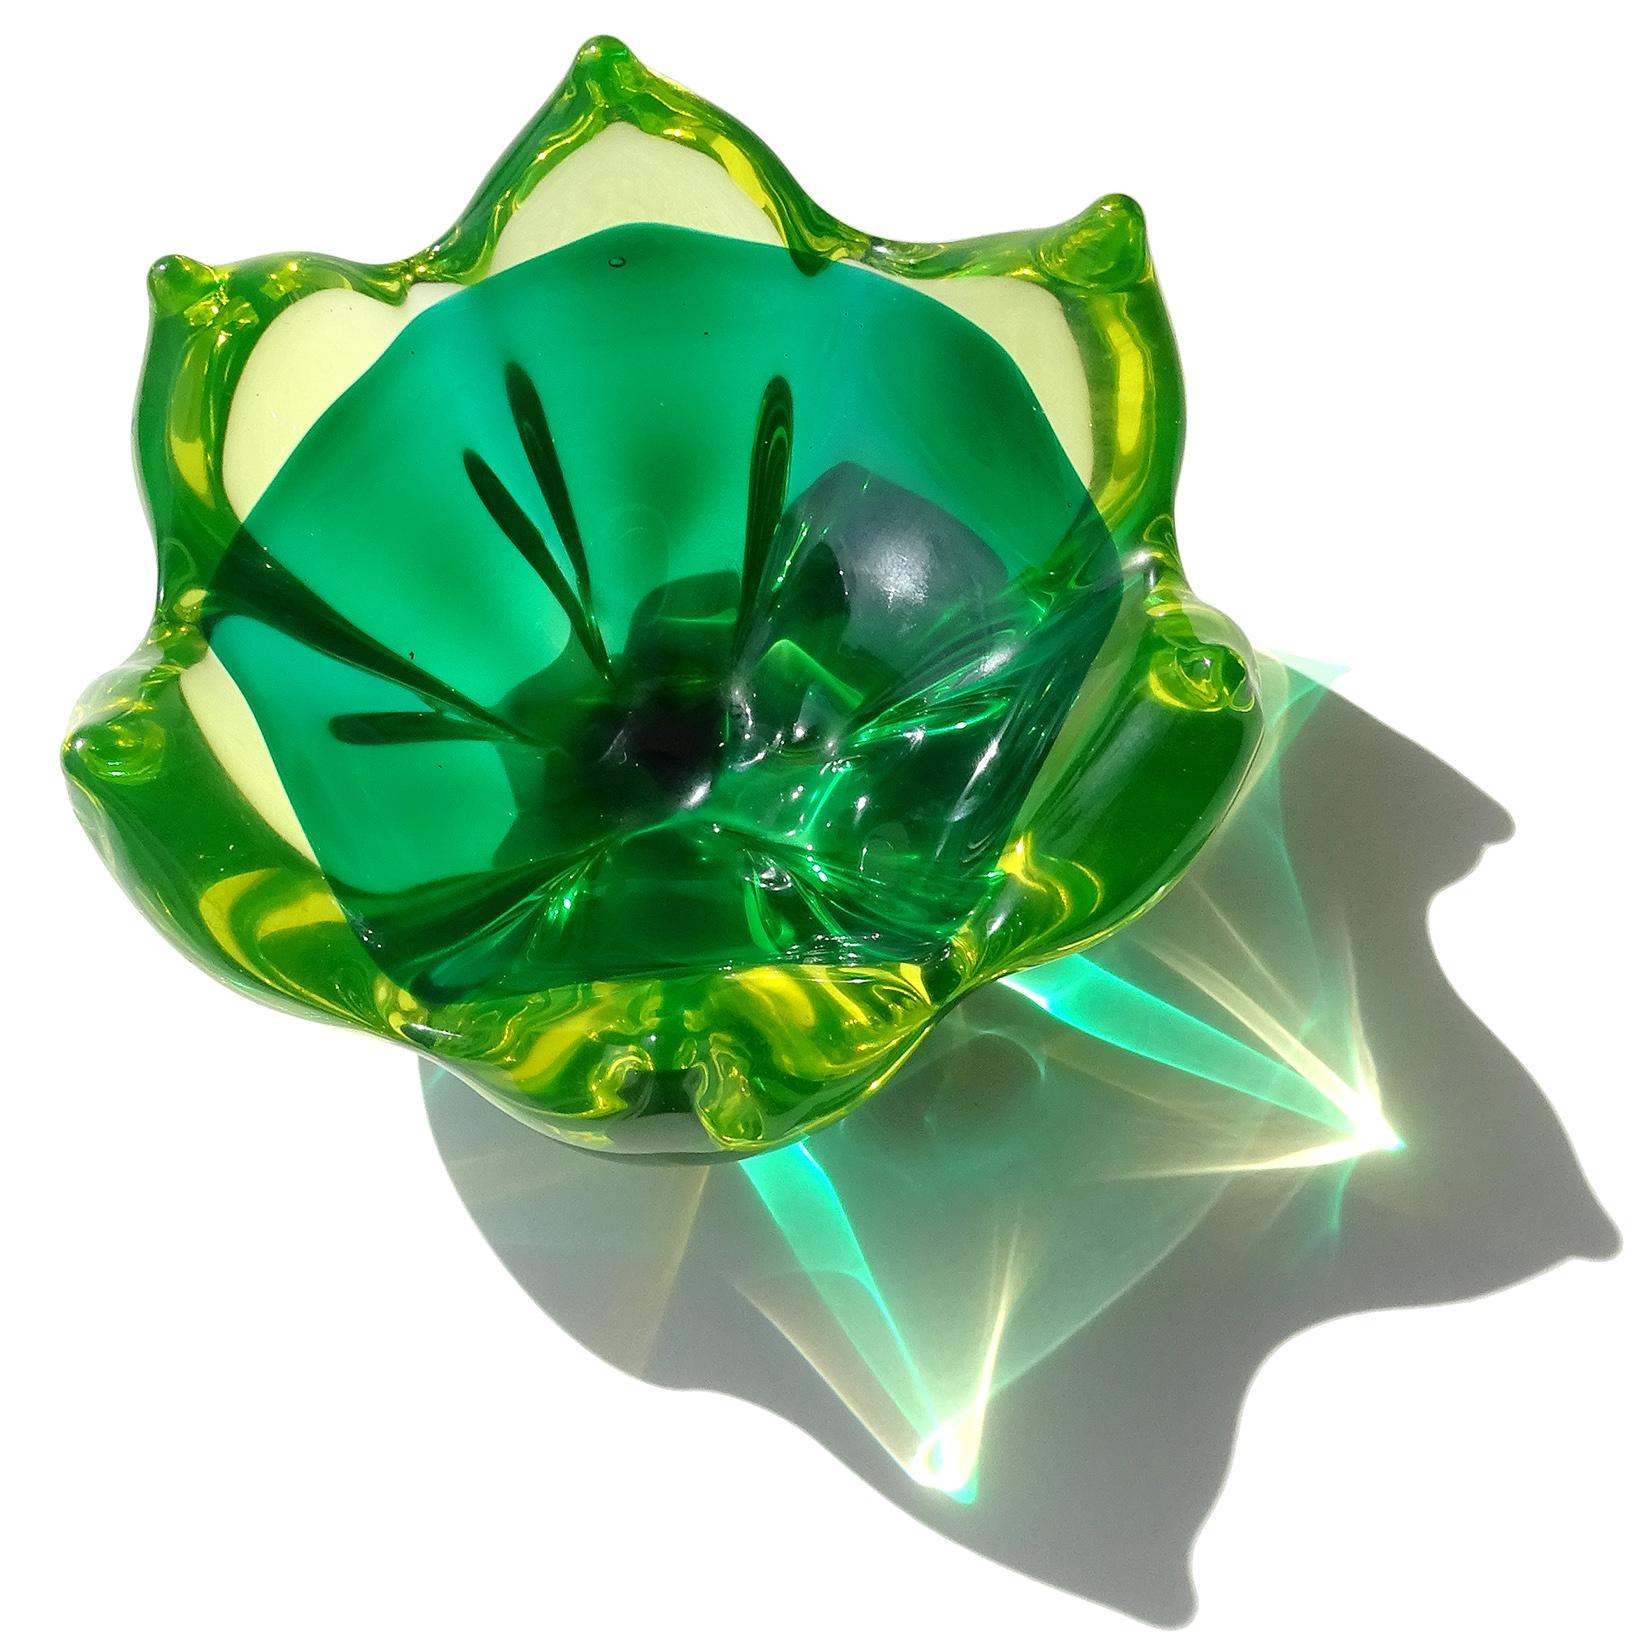 Beautiful Murano hand blown Sommerso green and yellow glass Italian art glass Lotus flower shaped bowl. Documented to designer Archimede Seguso. Still retains original 